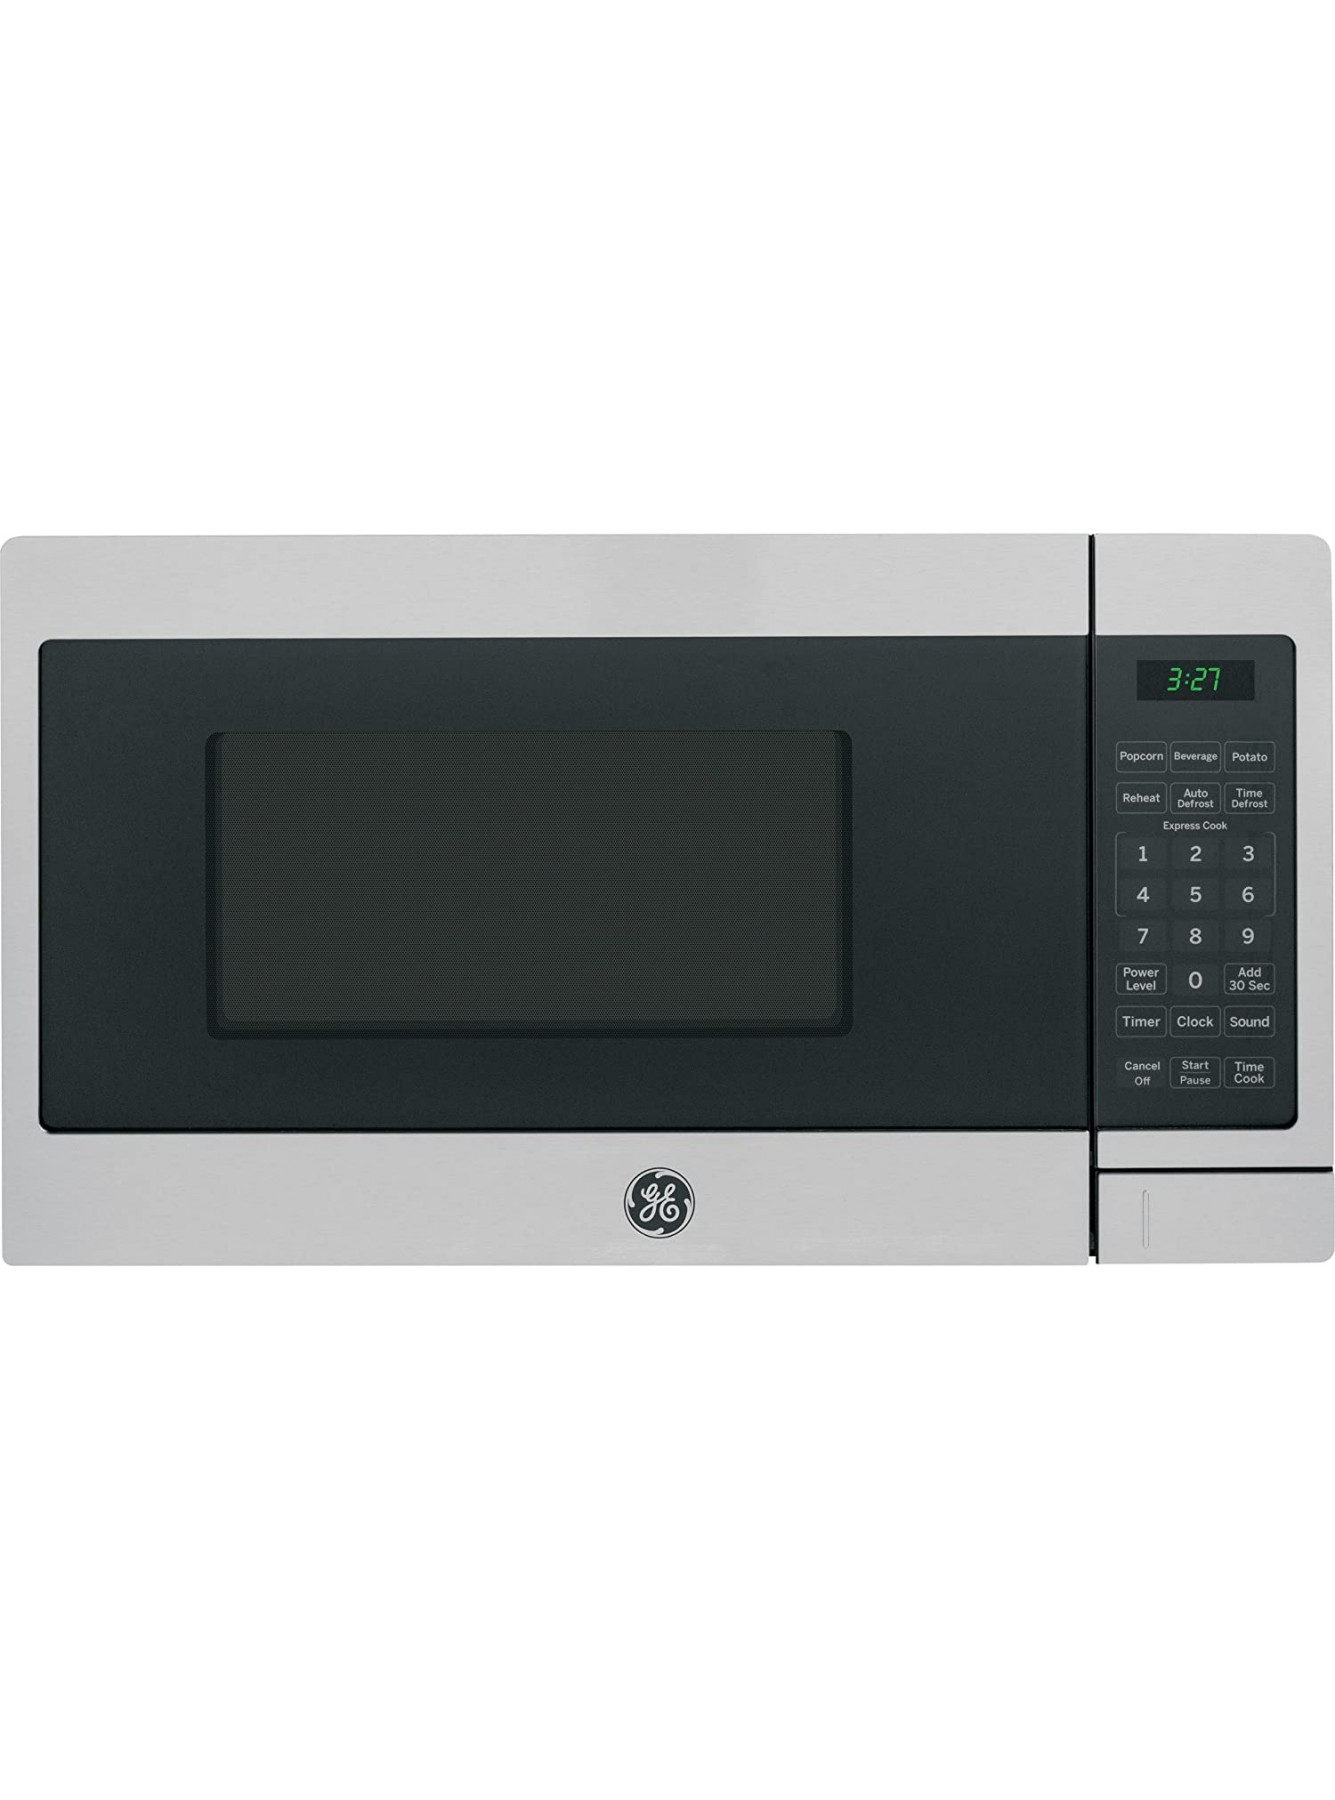 GE Countertop Microwave Oven | Includes Optional Hanging Kit | 0.7 Cubic Feet Capacity 700 Watts | Kitchen Essentials for the Countertop | Stainless Steel B00U7XFELU